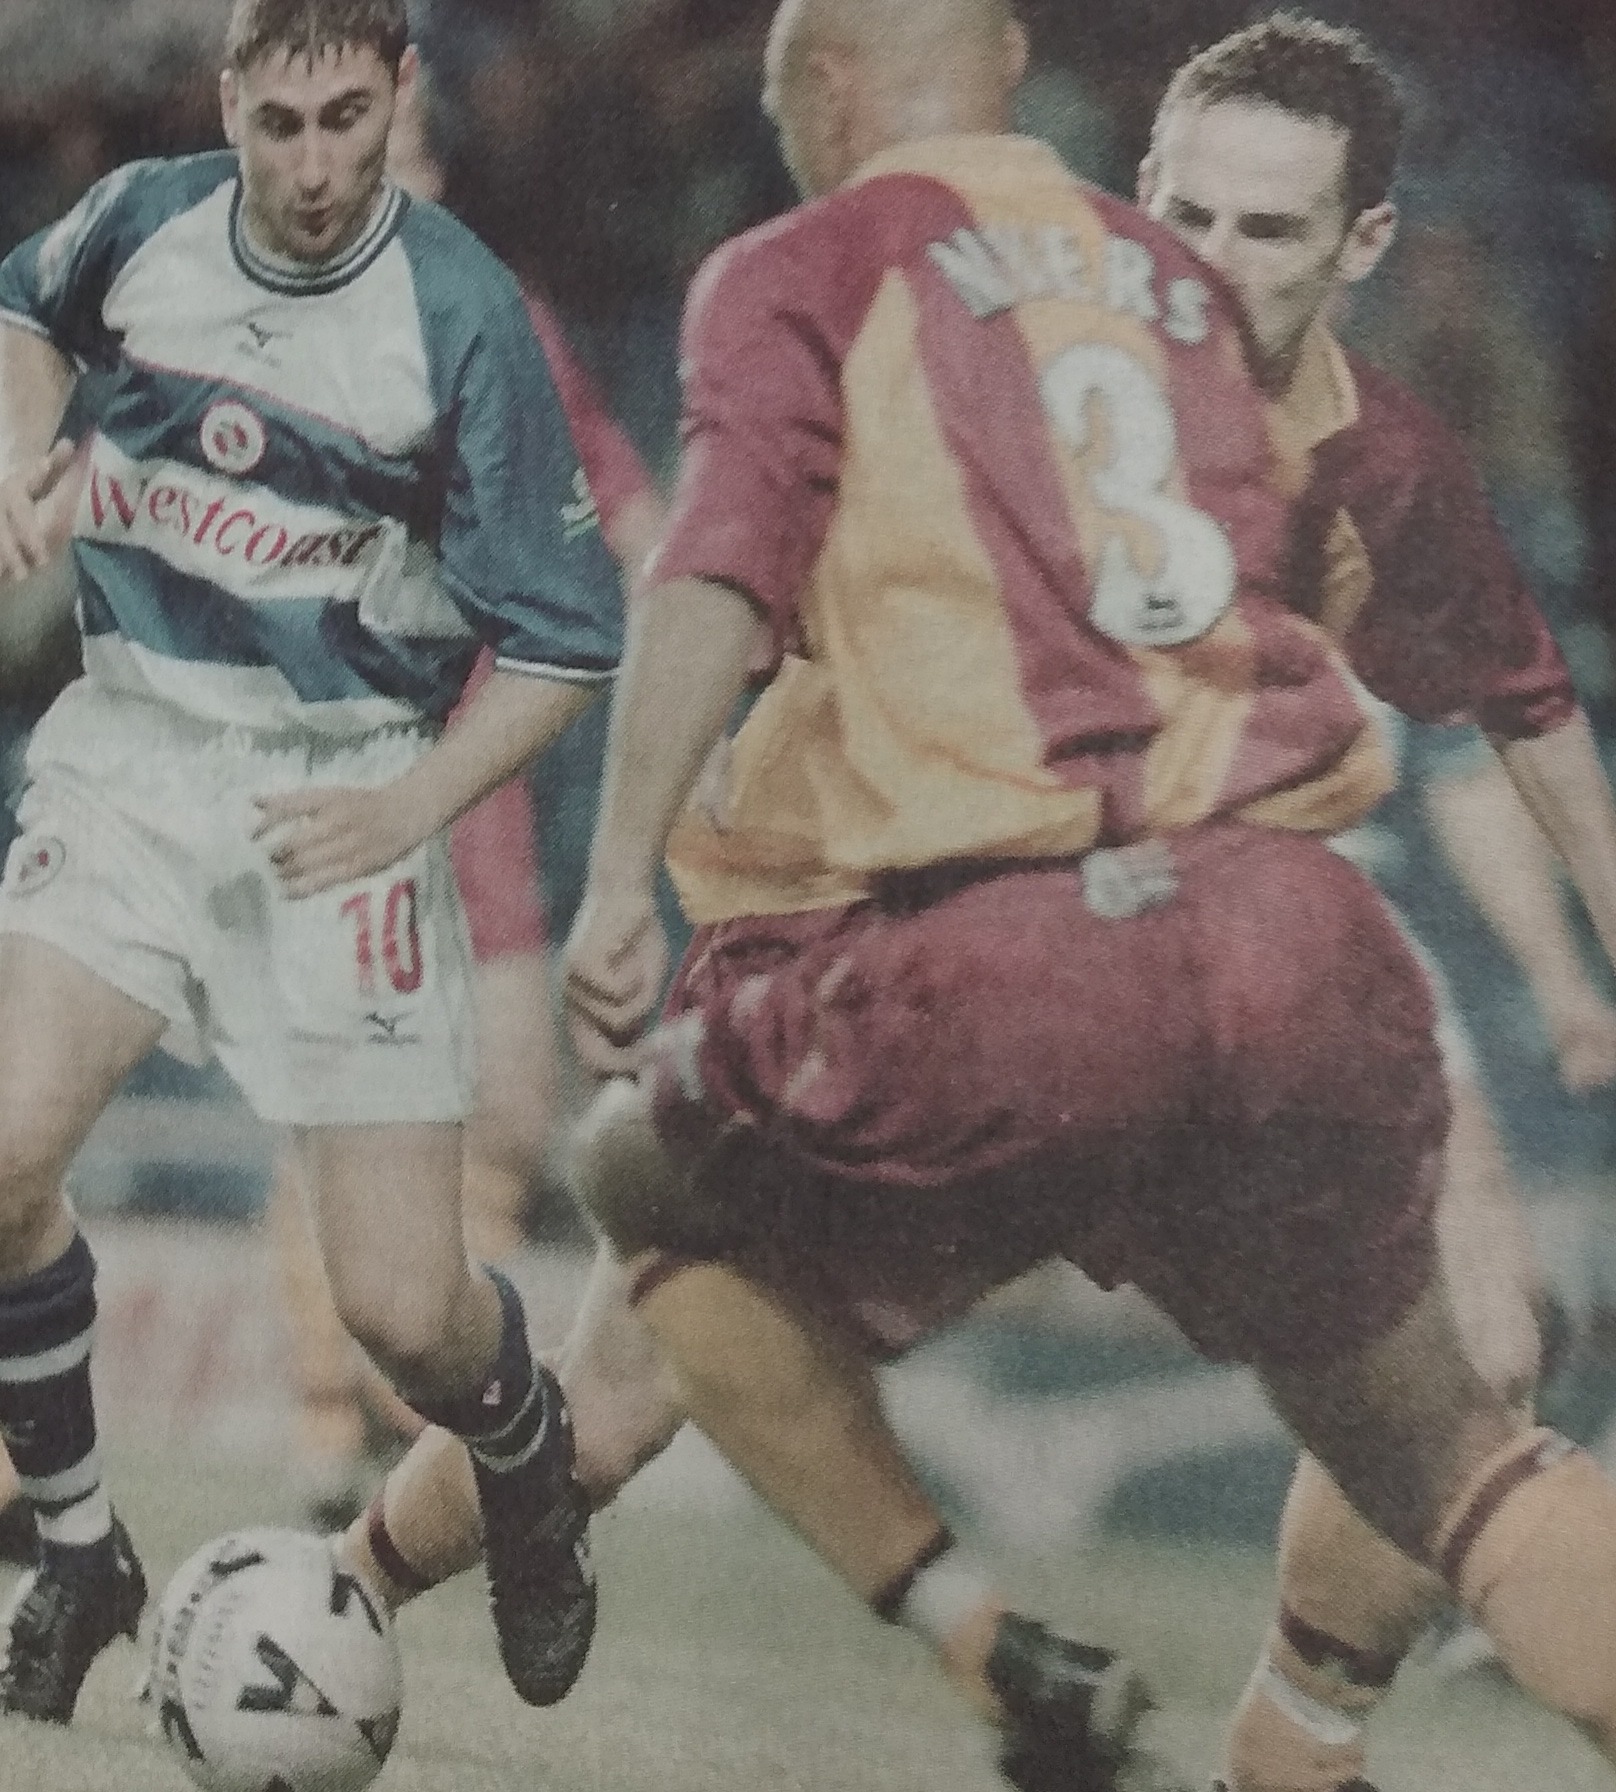 Nicky Foster in action against then PL side, Bradford City 